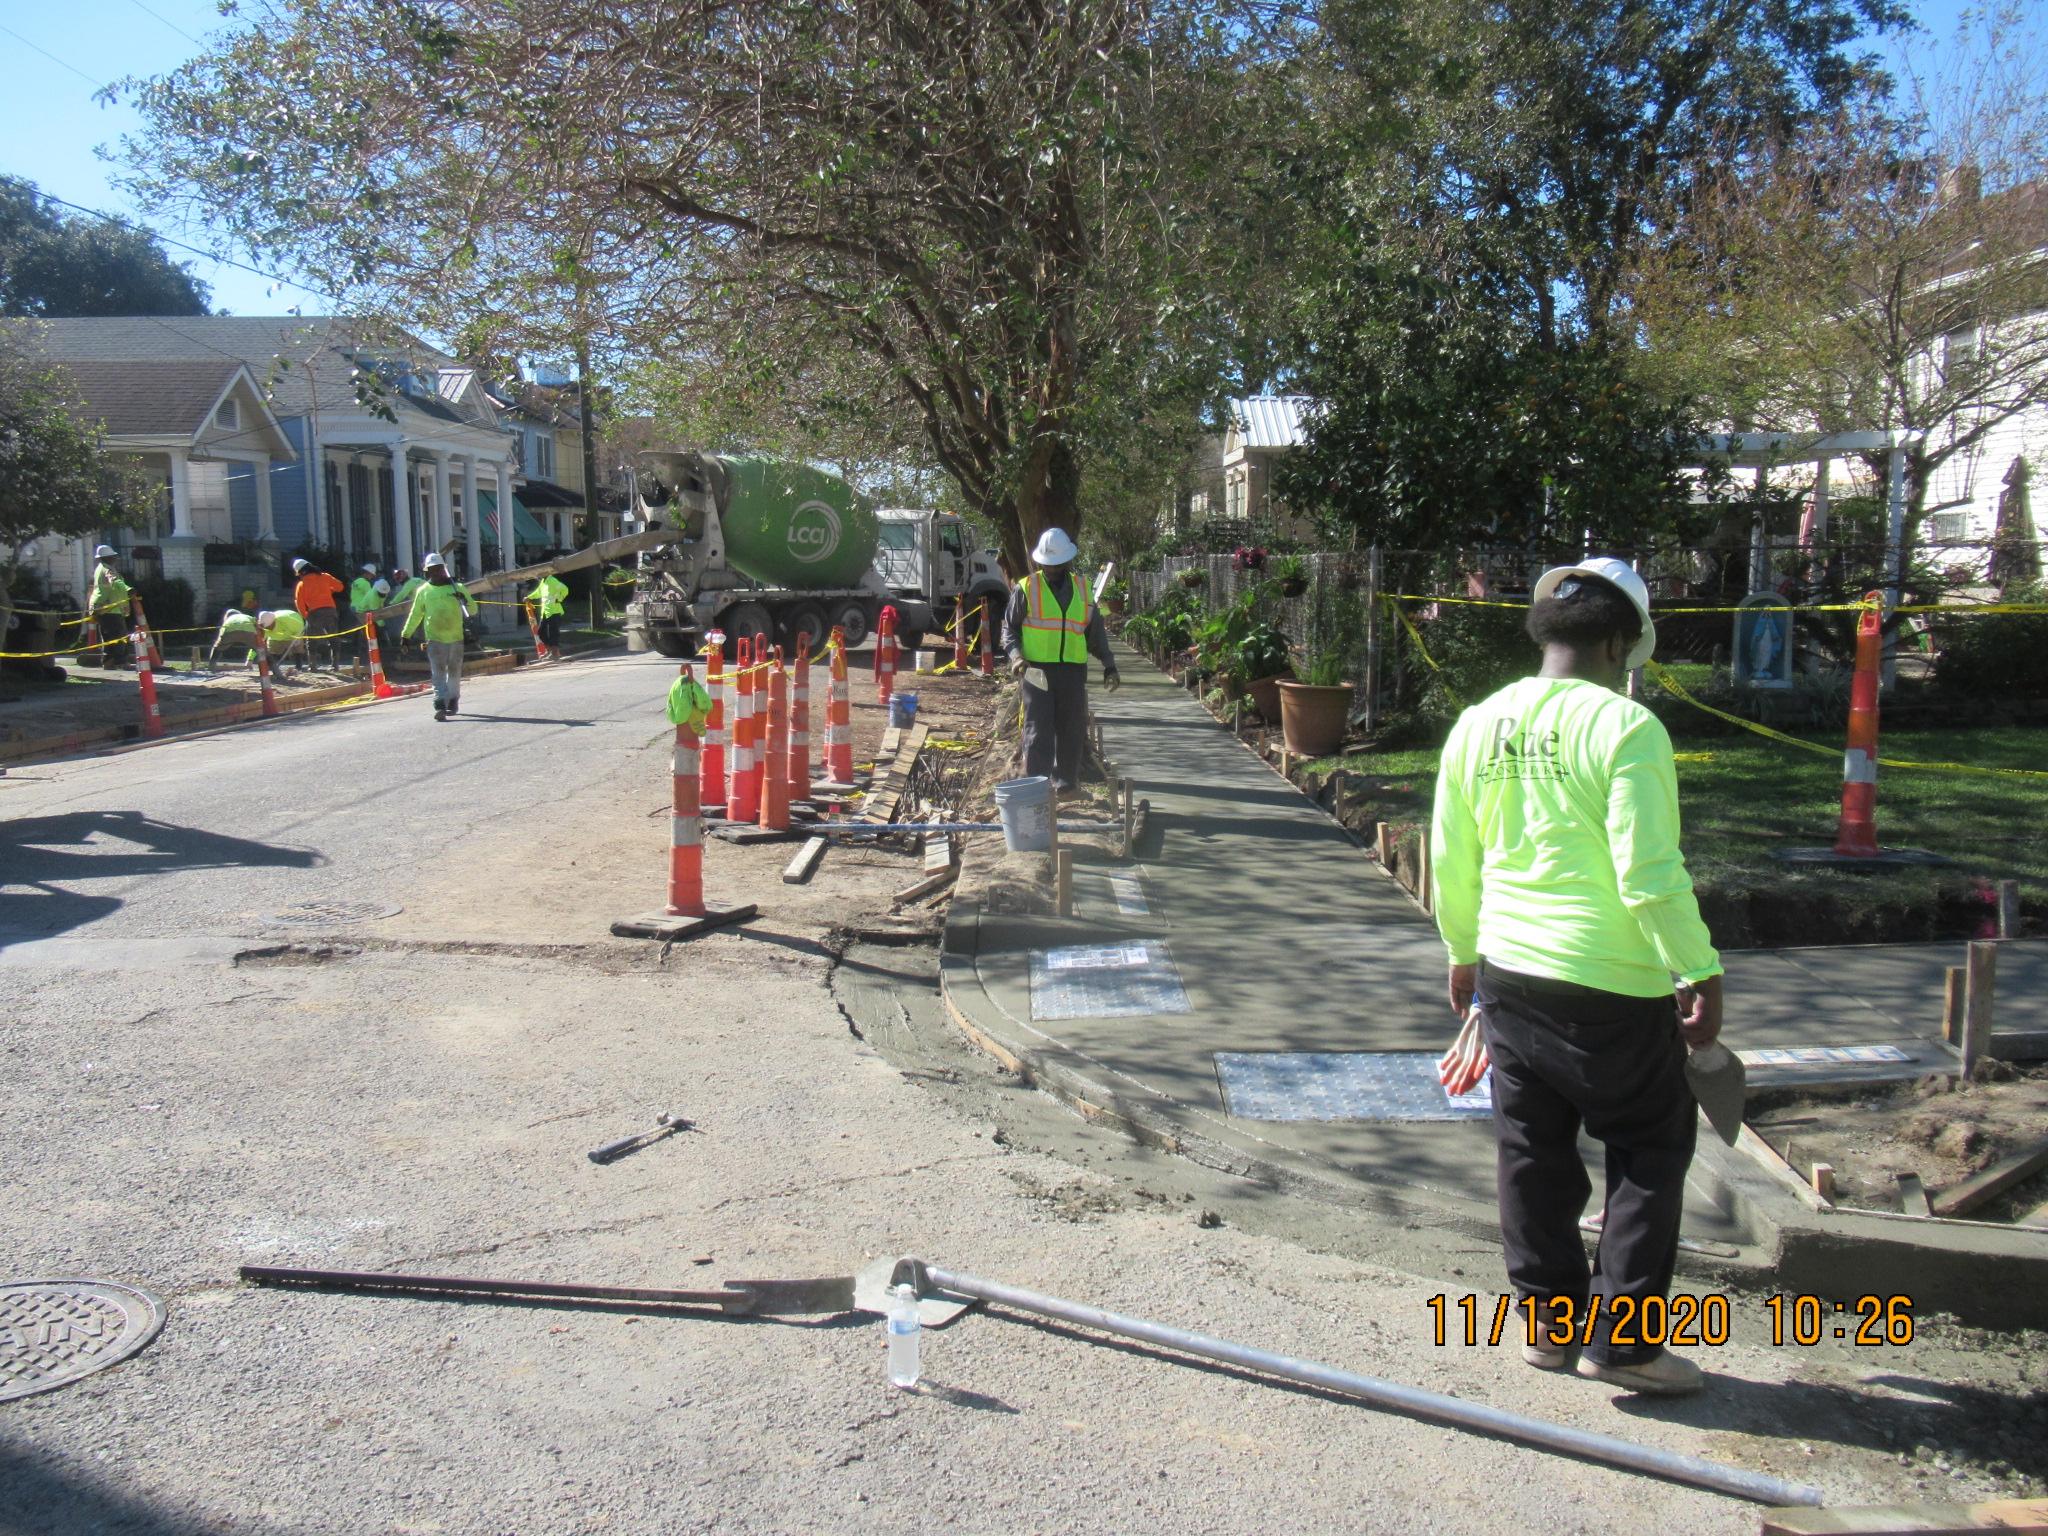 SIDEWALK, DRIVEWAYS, ADA RAMPS, CURBS, PAVING, SEWER AND DRAIN REPAIRS CONTINUE ON CITY PARK GROUP A